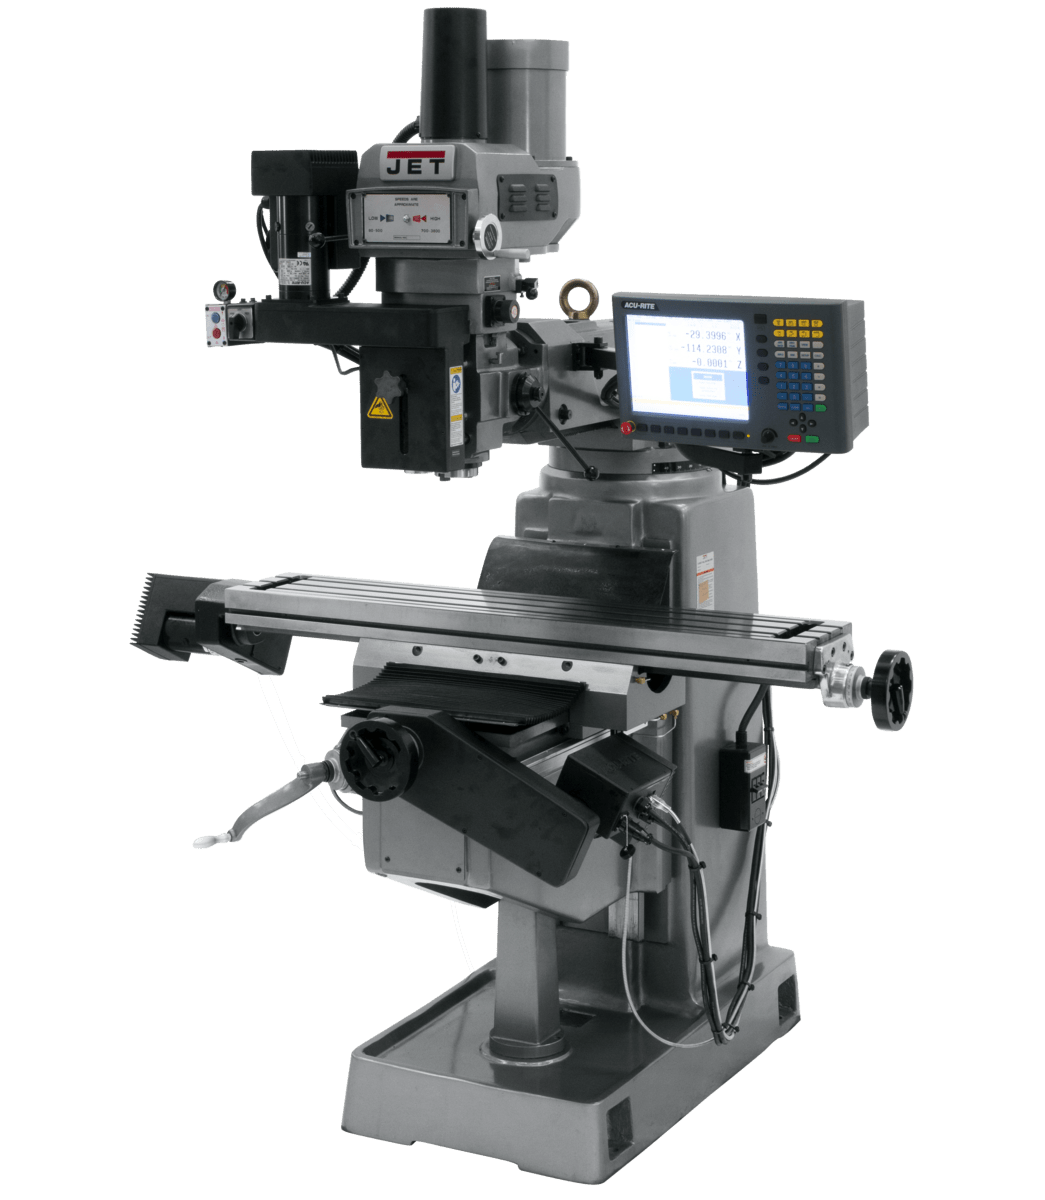 JTM-949EVS/230 Mill With 2-Axis ACU-RITE G-2 MILLPWR CNC - Jet